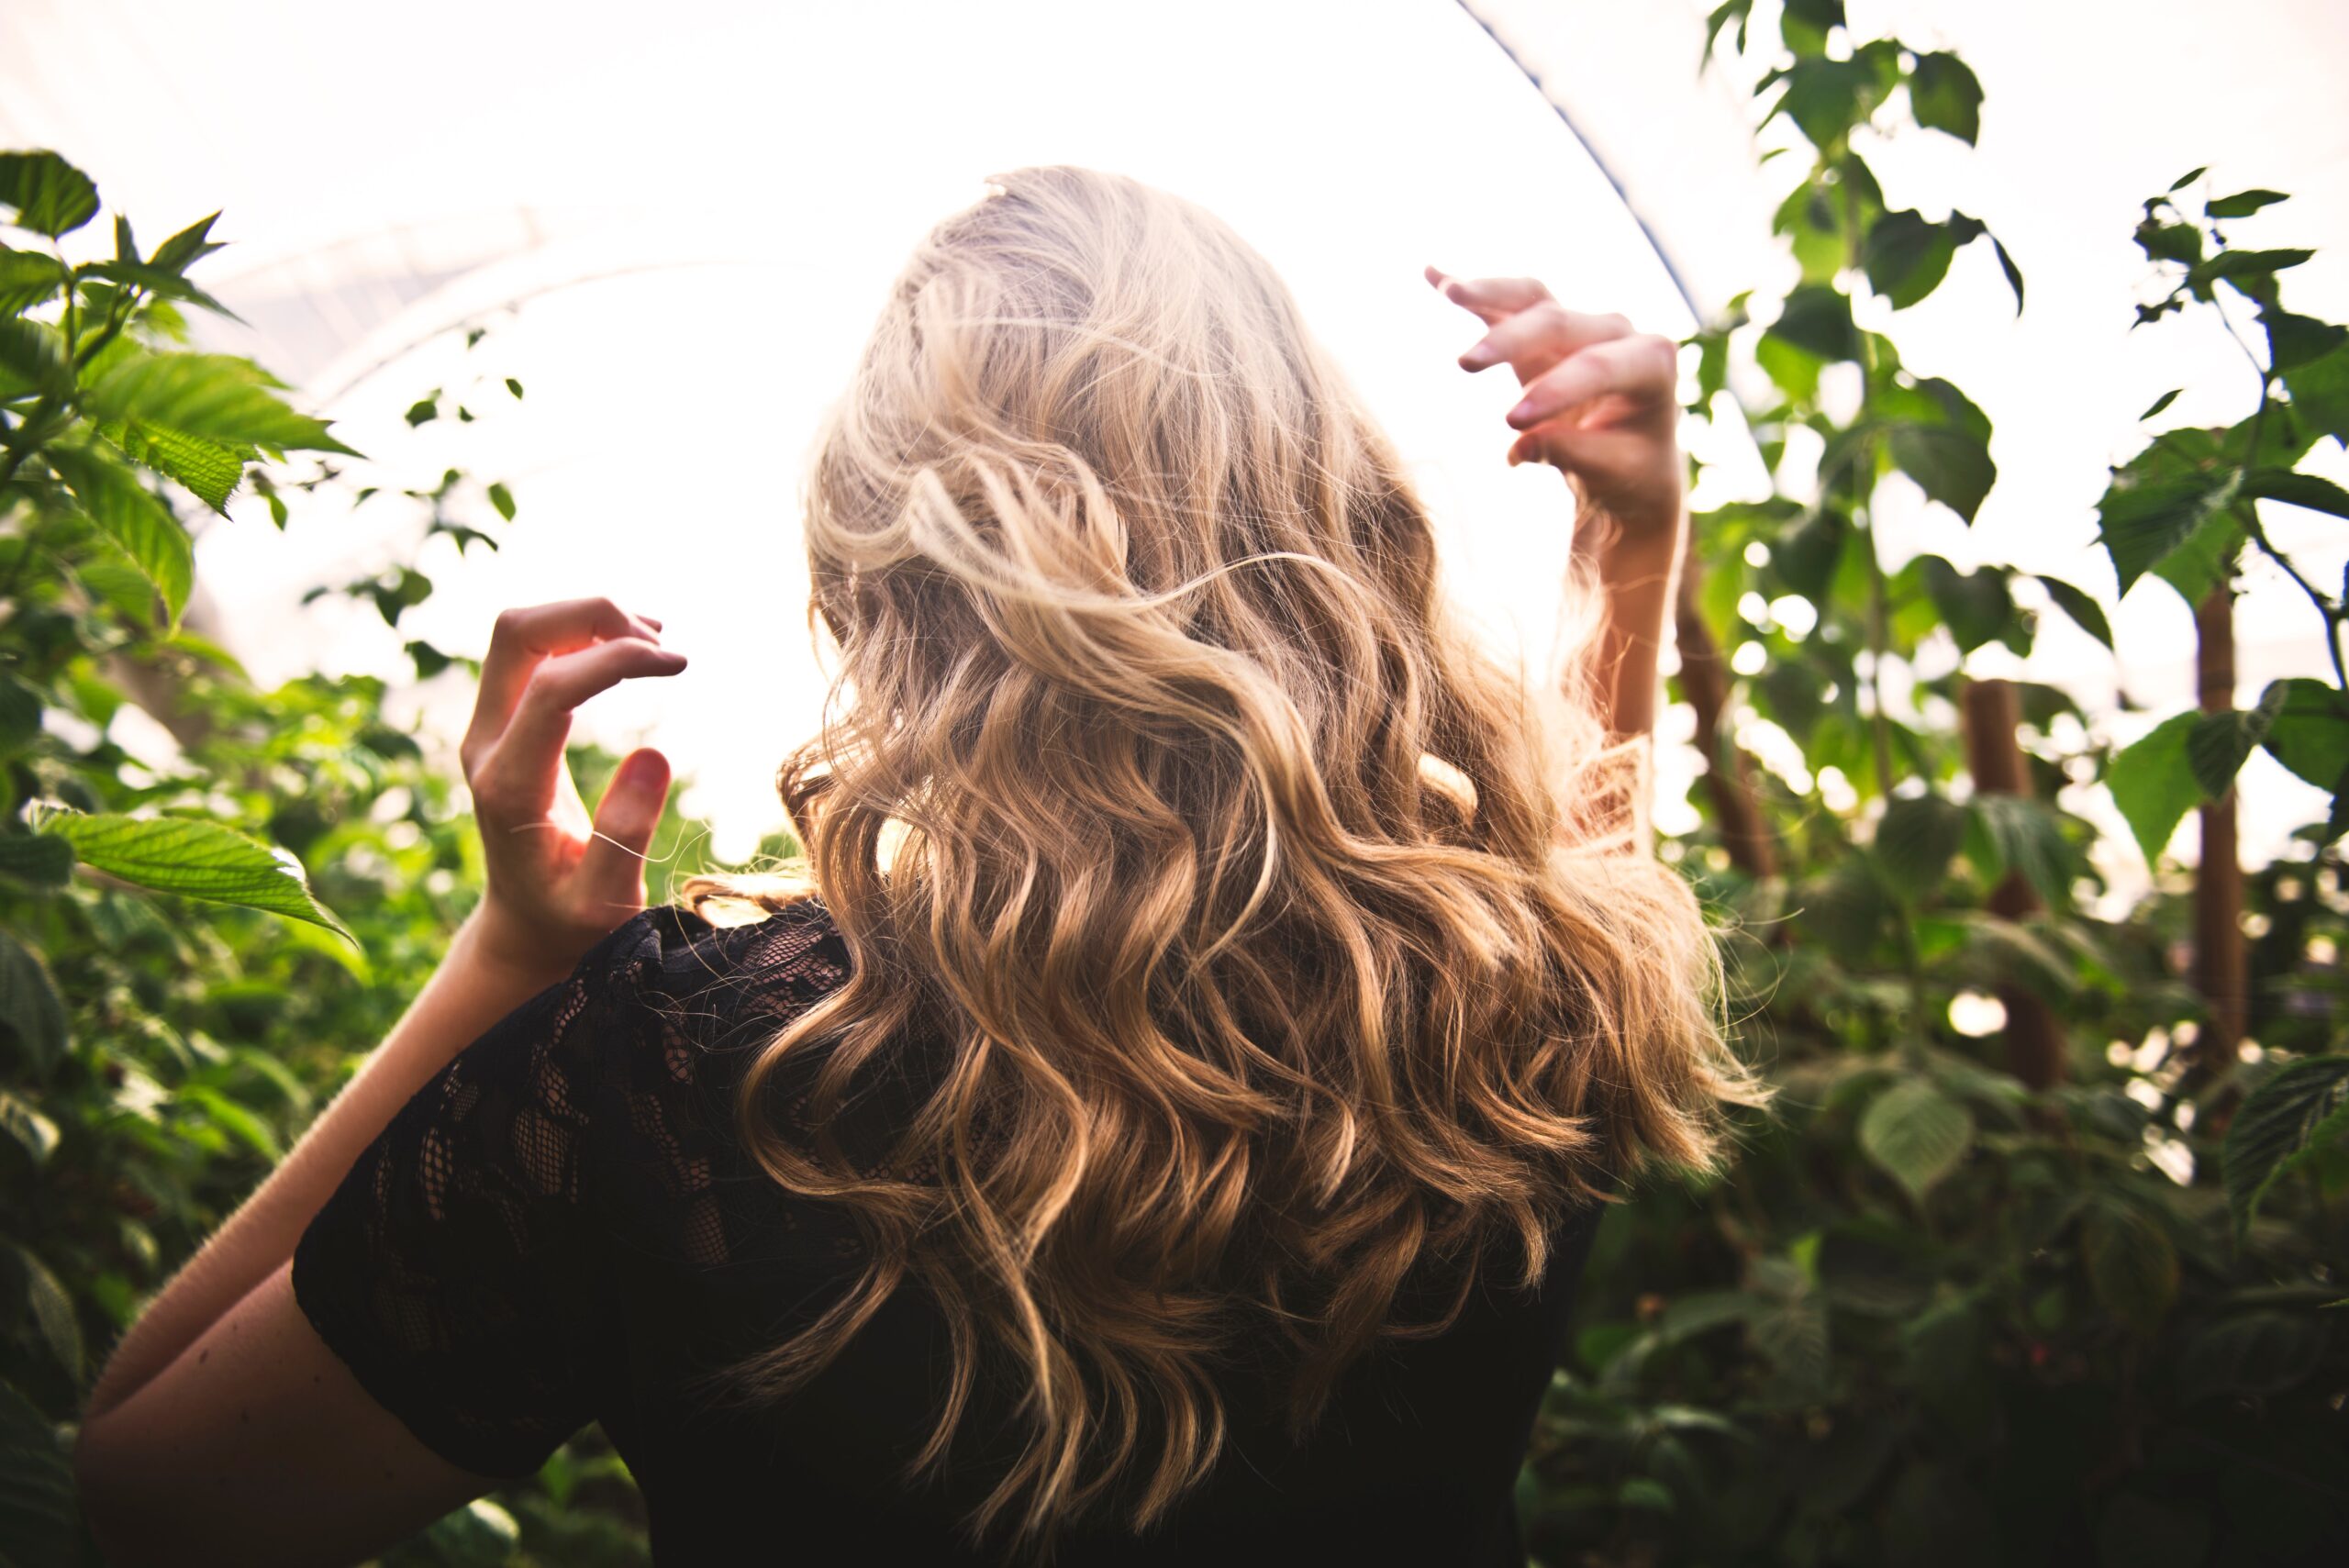 Tips on Natural Hair Care